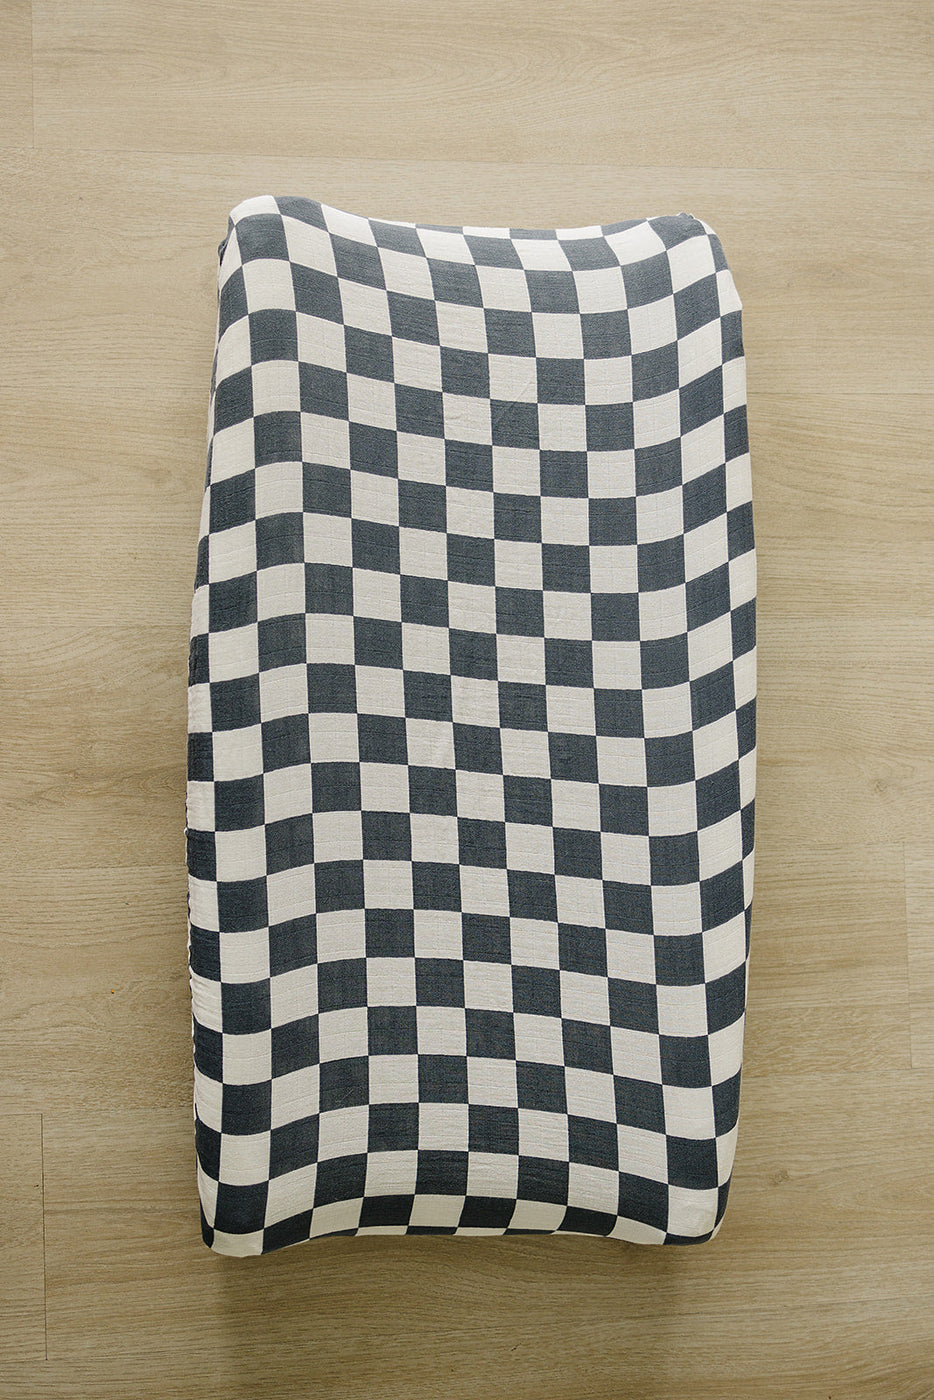 a black and white checkered blanket on a wood floor